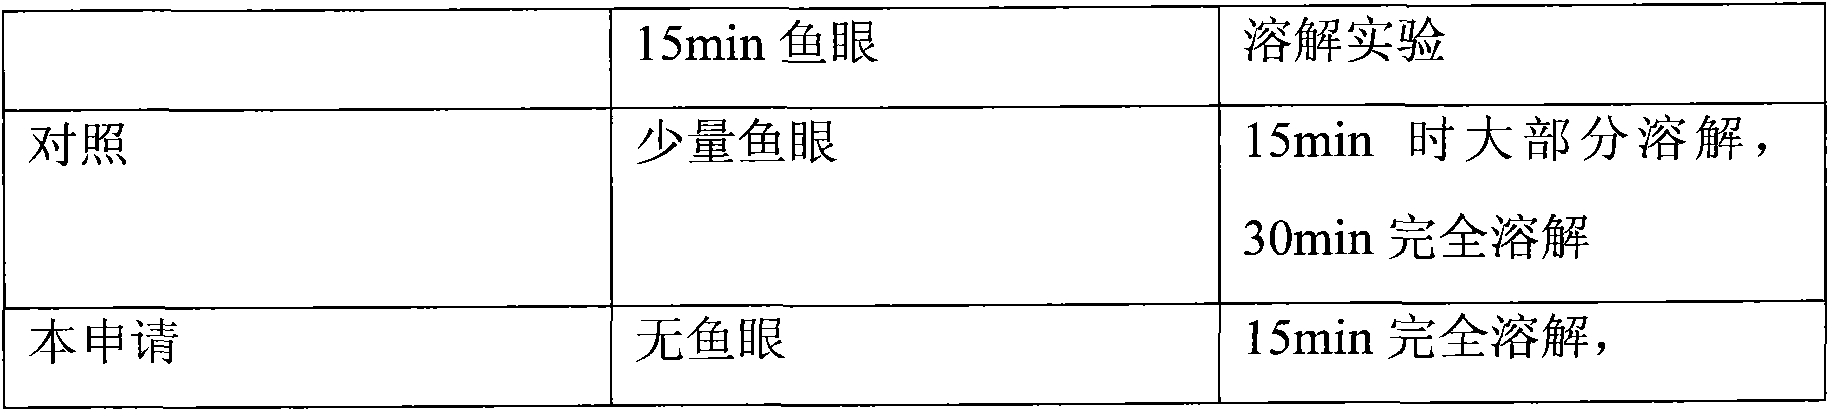 Producing method of instant xanthan gum